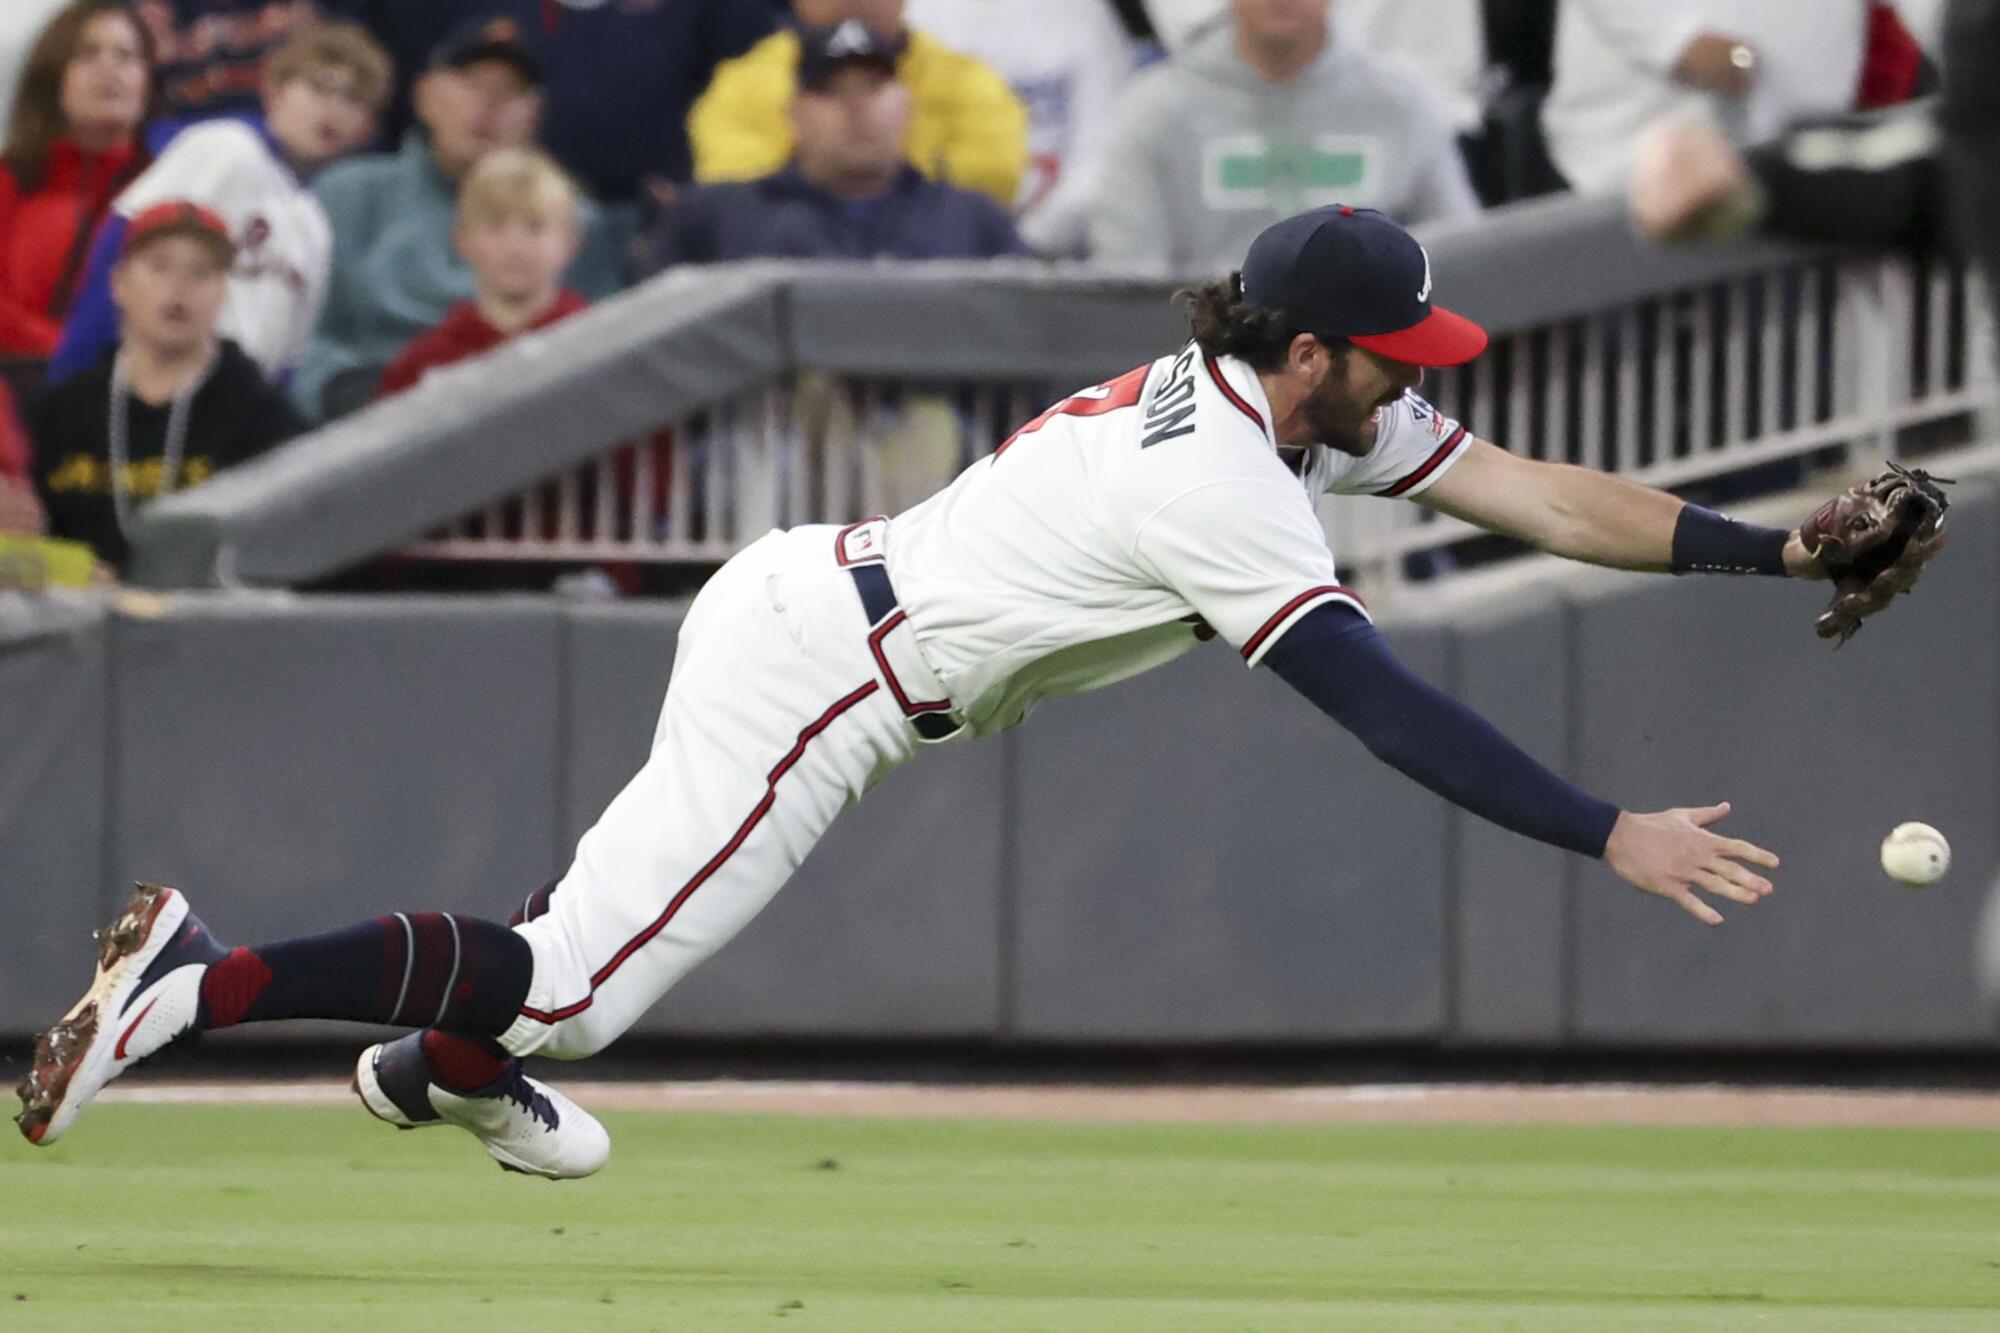 Braves shortstop Dansby Swanson is unable to make a play on a ball hit for a single by Dodgers' Mookie Betts